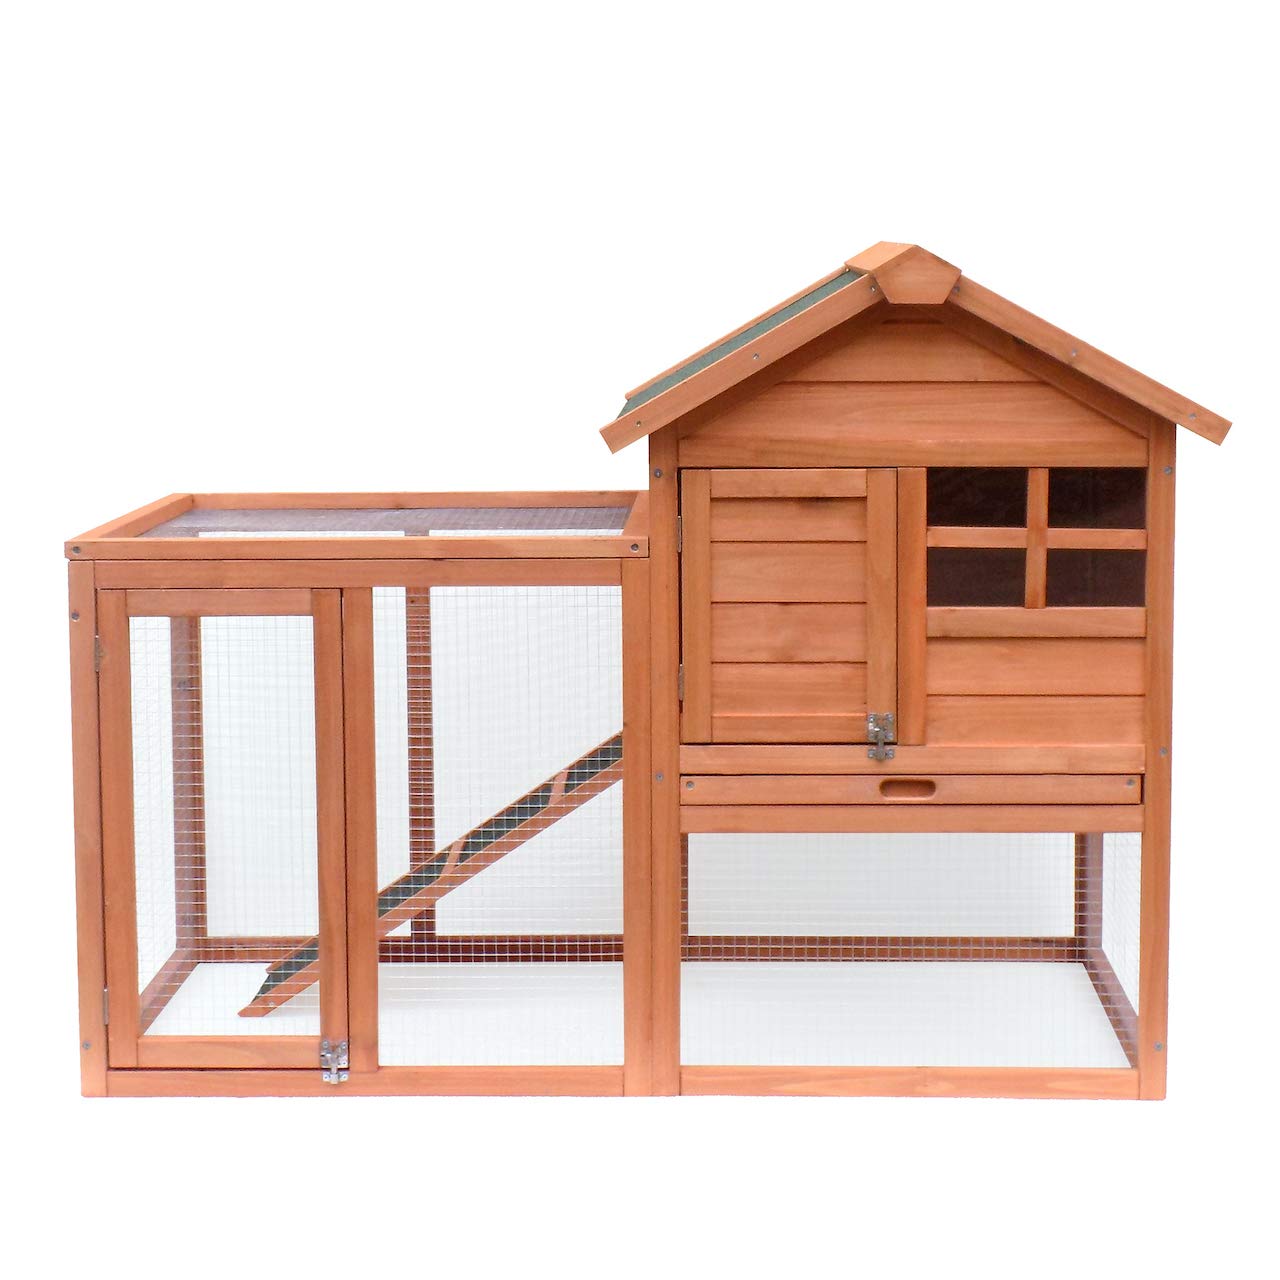 Choyop Wooden Pet House Rabbit Bunny Wood Hutch House Chicken Coops Chicken Cages Rabbit Cage (48" L X 25" D X 36" H)